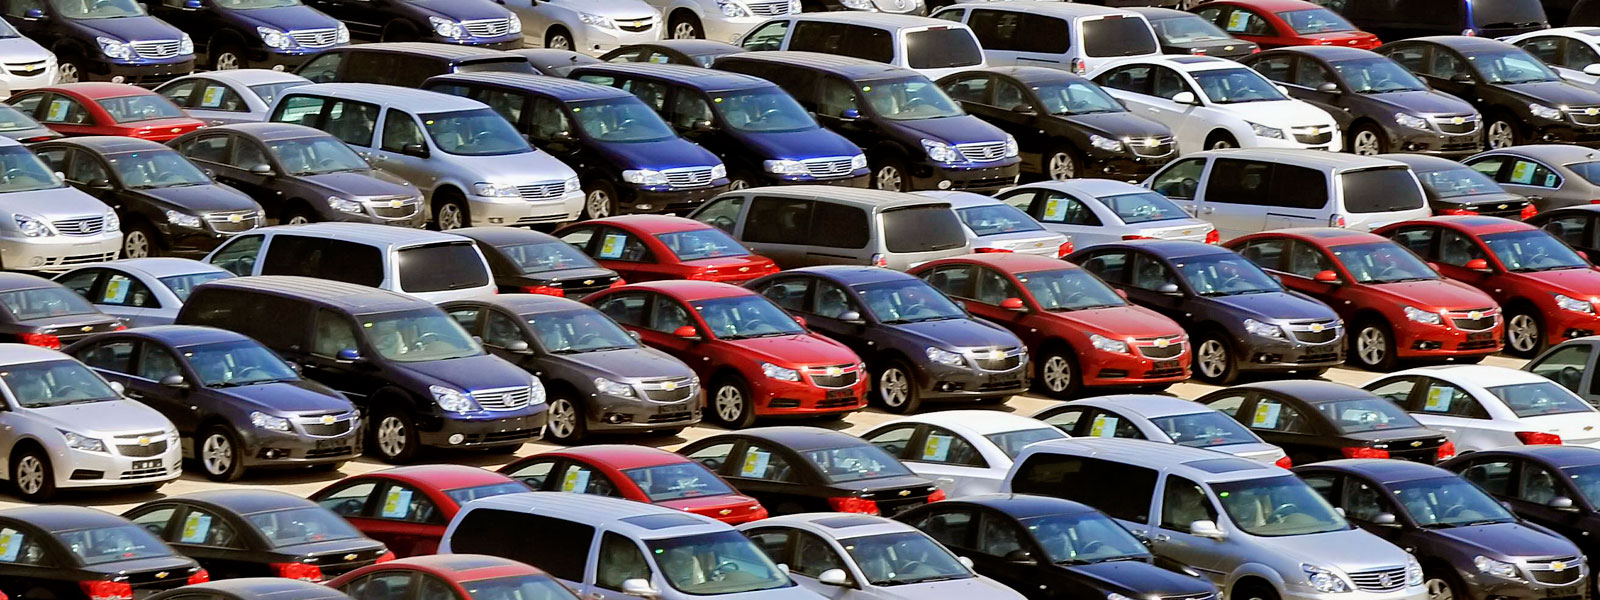 Ten tips for buying a used car